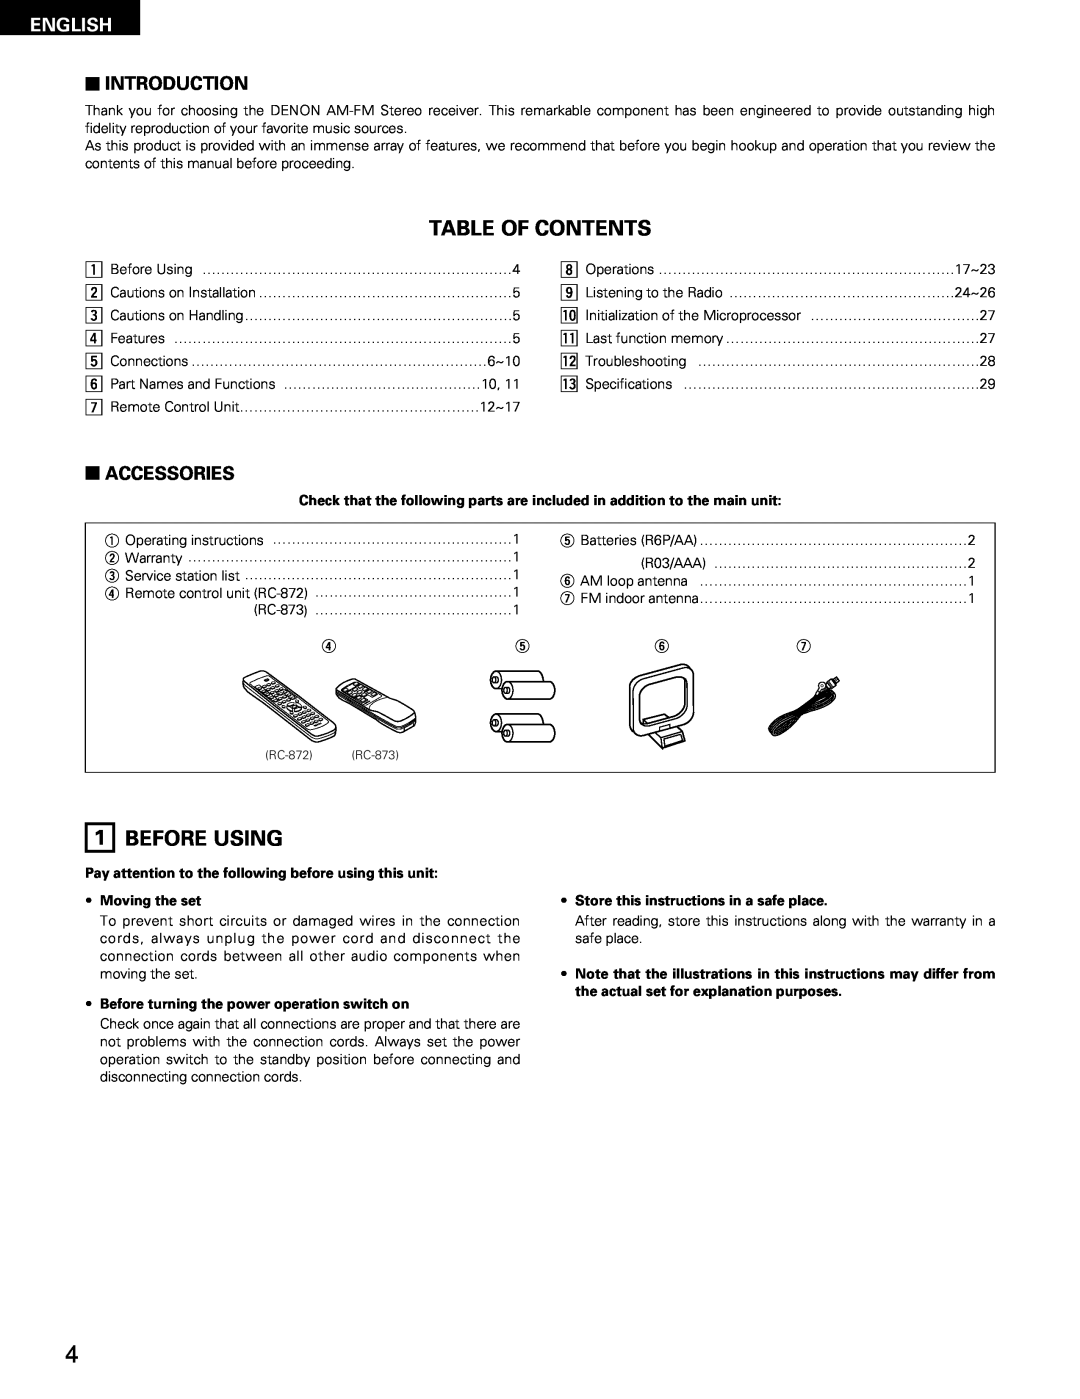 Denon DRA-685 manual Table Of Contents, Before Using, English, 2INTRODUCTION, 2ACCESSORIES 